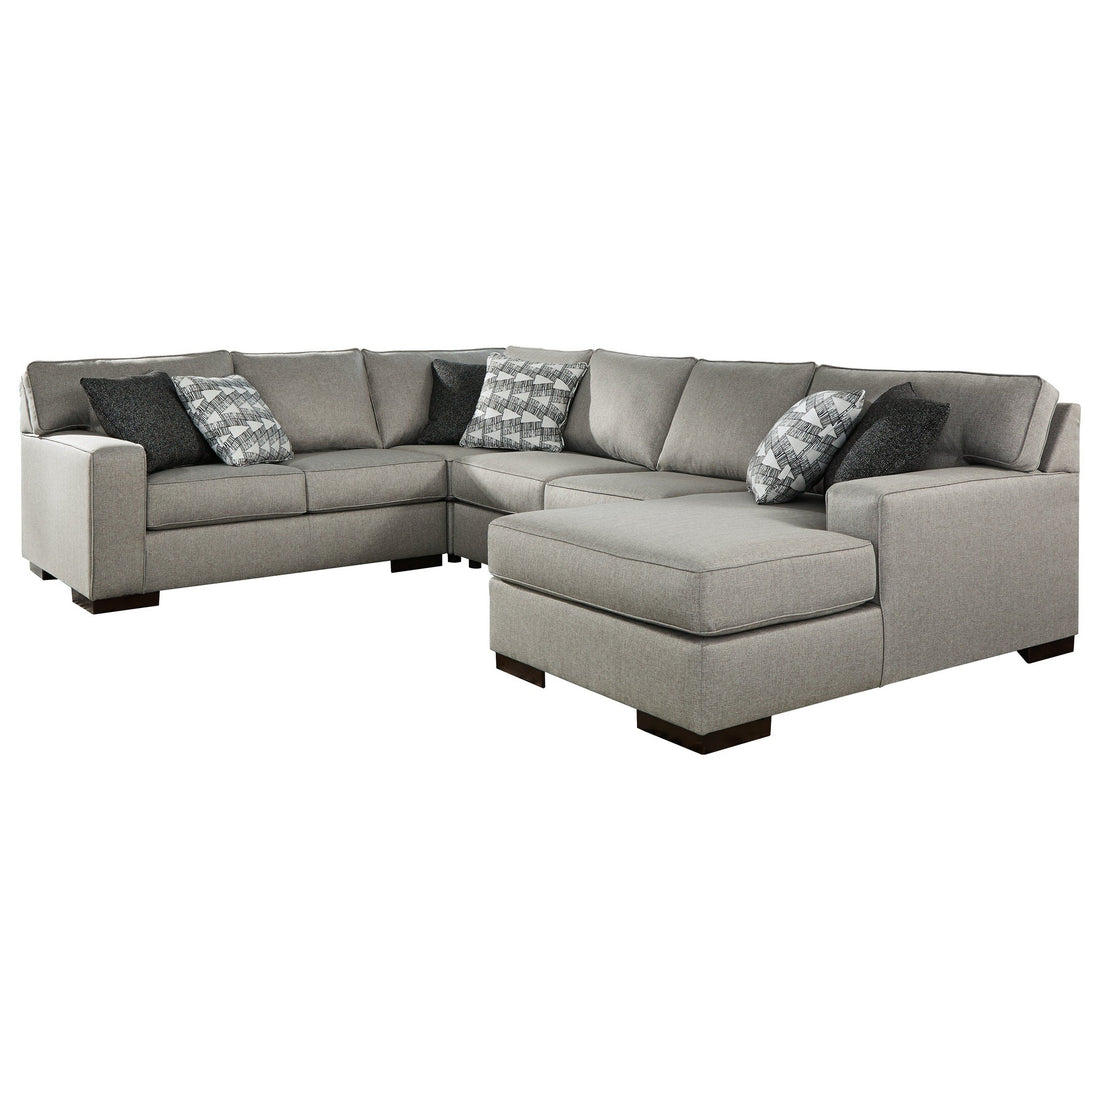 Marsing Nuvella 4-Piece Sectional with Chaise Ash-41902S4